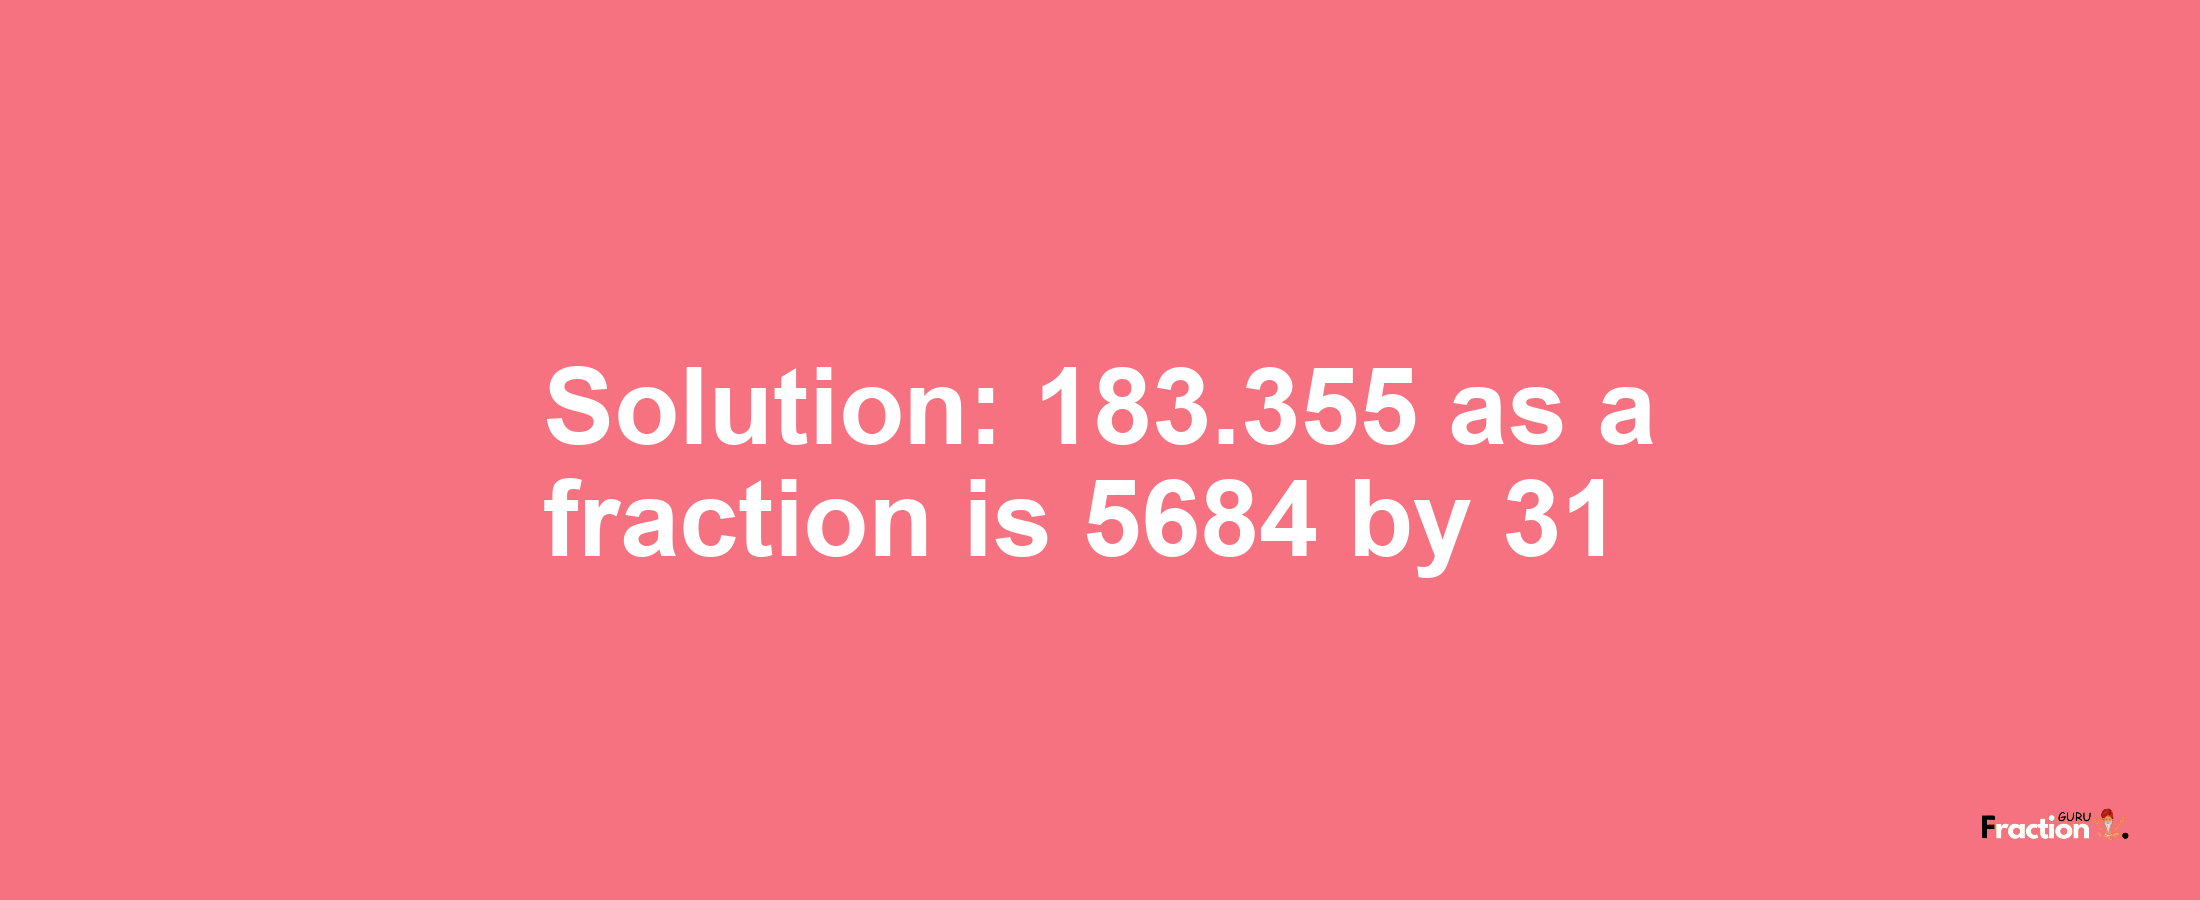 Solution:183.355 as a fraction is 5684/31